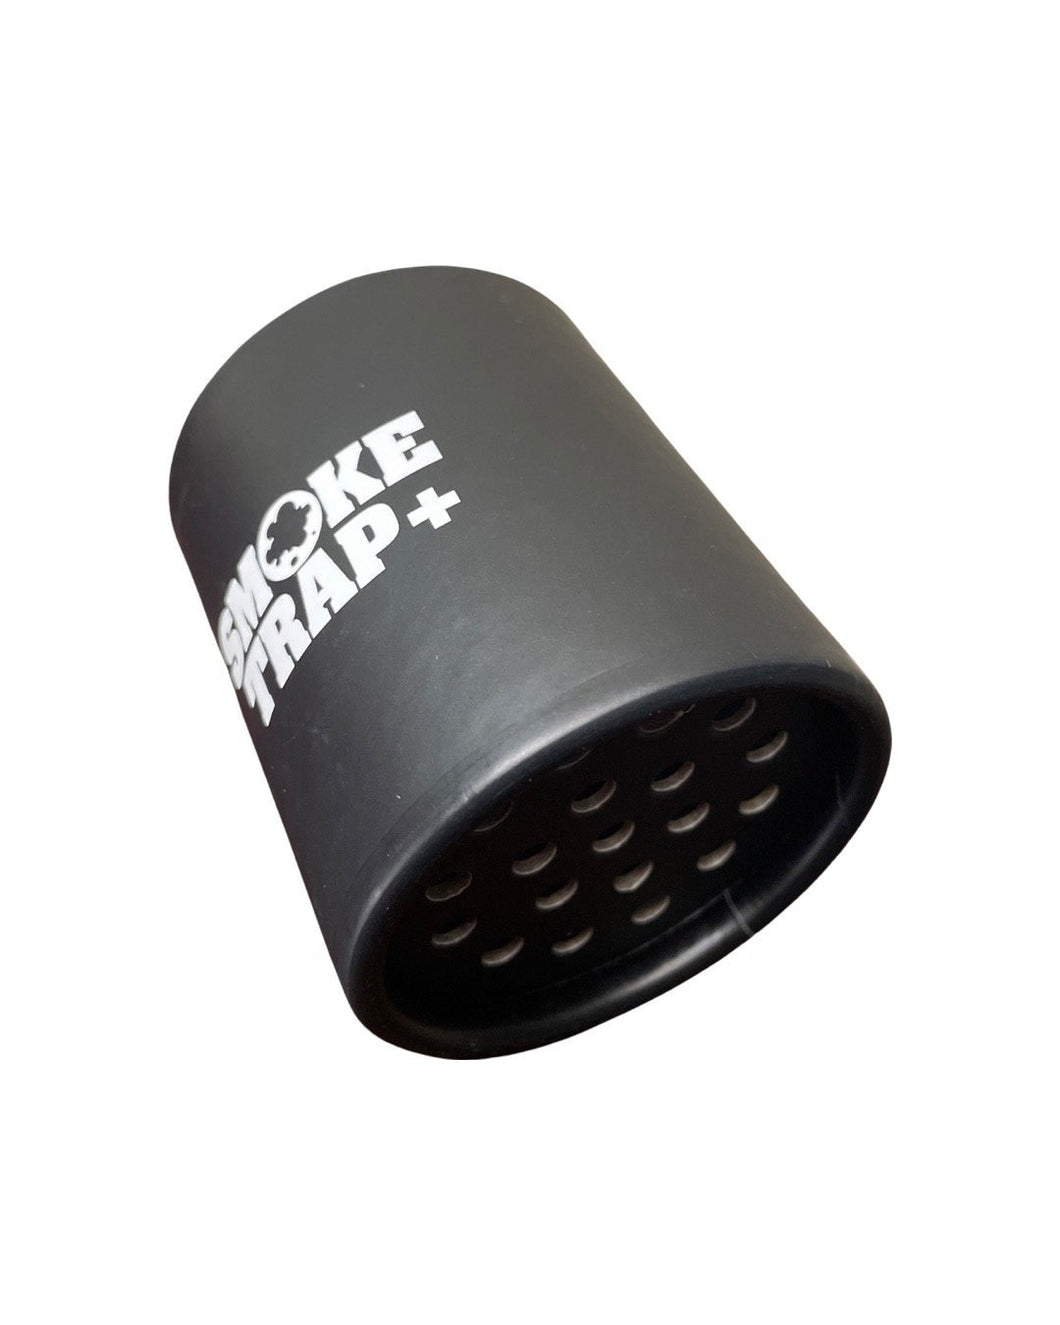 Smoke Trap + | Personal Air Filter (Sploof/Buddy) - Smoke Filter With ECO  Replaceable Filters - Long Lasting 500+ Uses With Easy Exhale - Filters  Have